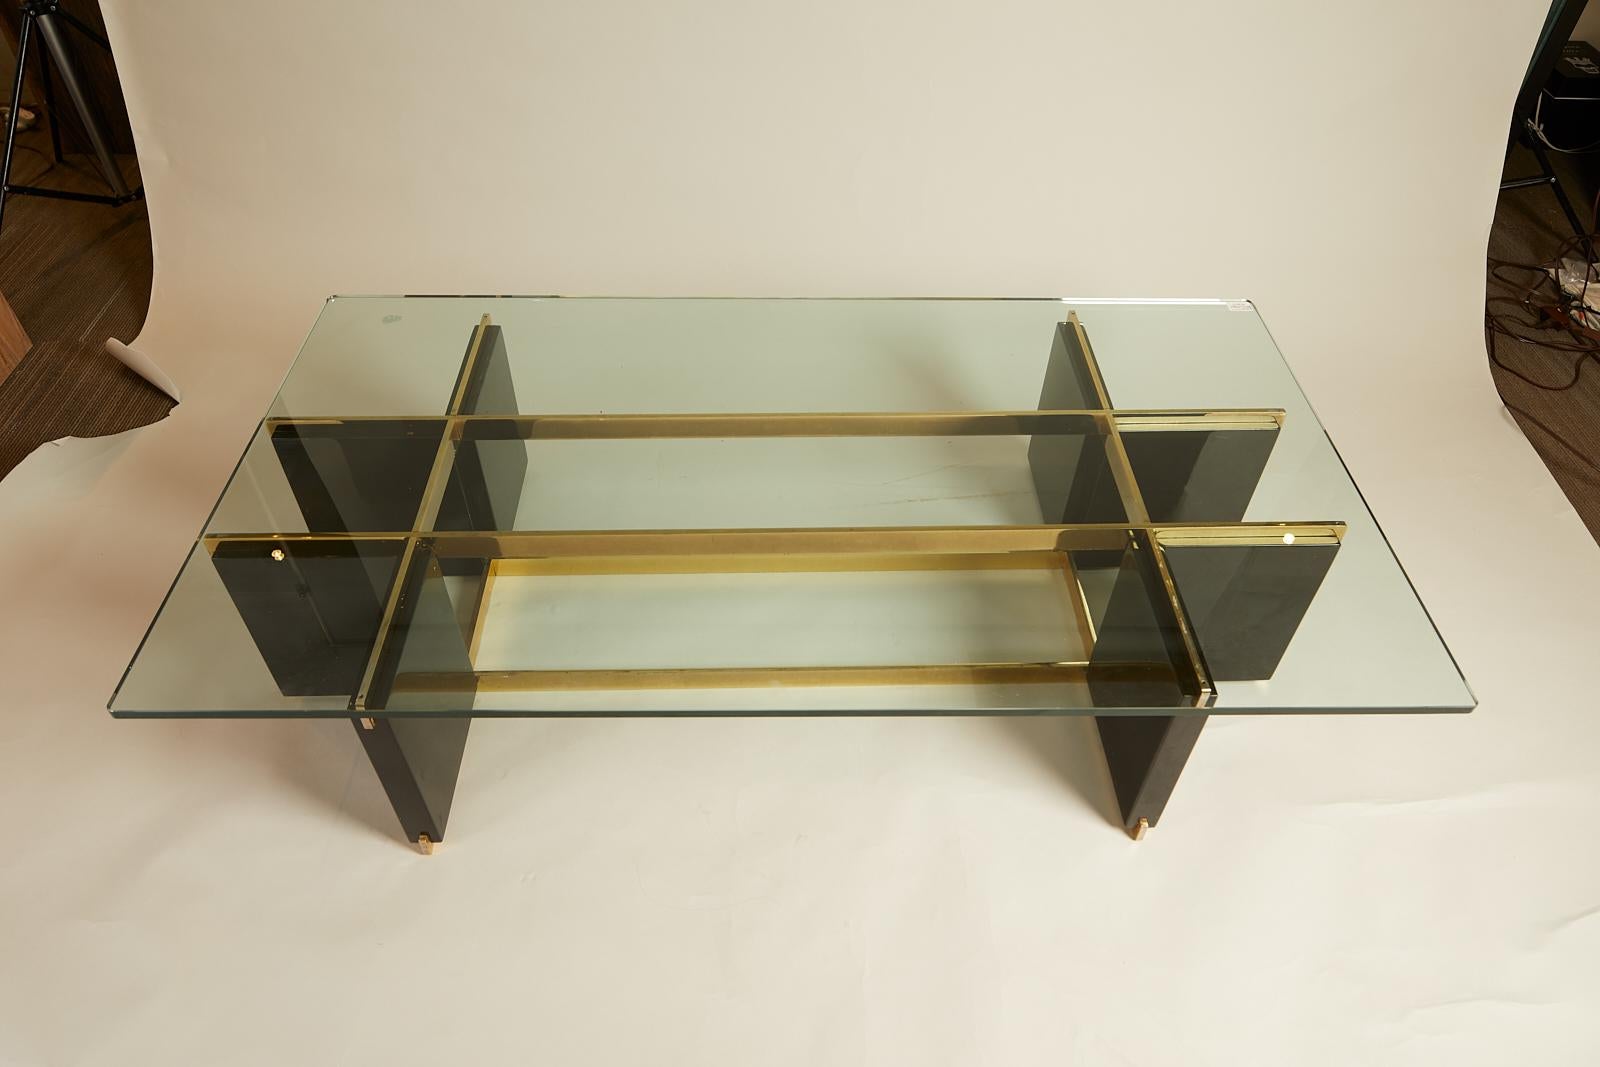 1970s French black lacquer brass and glass cocktail table.